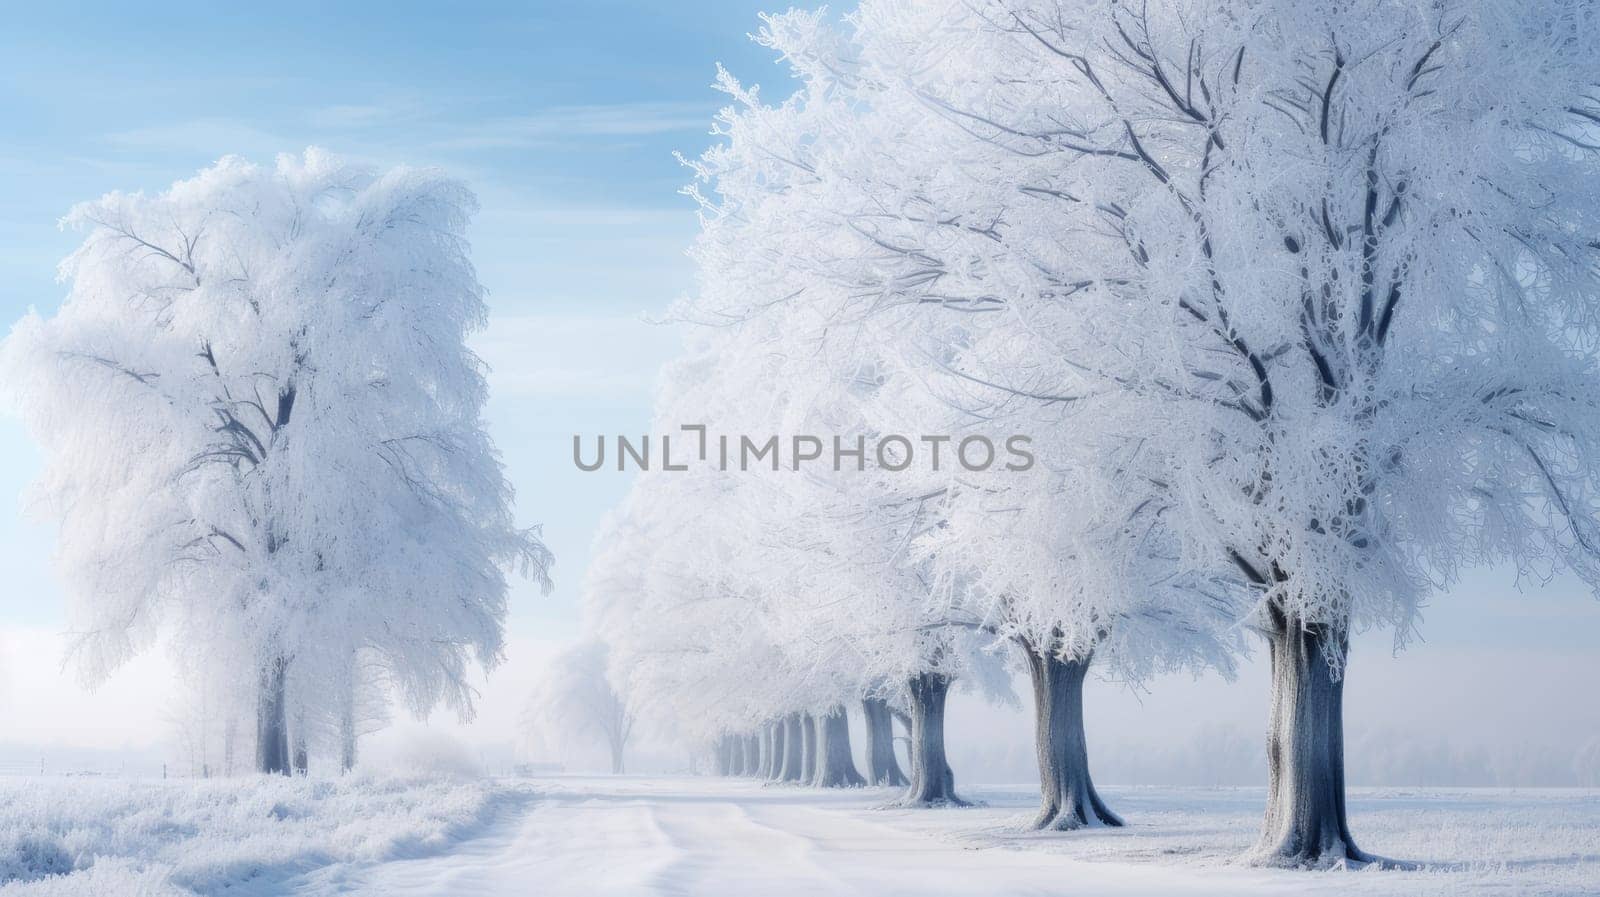 Snowy white trees, beautiful winter landscape, postcard. Concept of traveling around the world, recreation, winter sports, vacations, tourism in the mountains and unusual places.